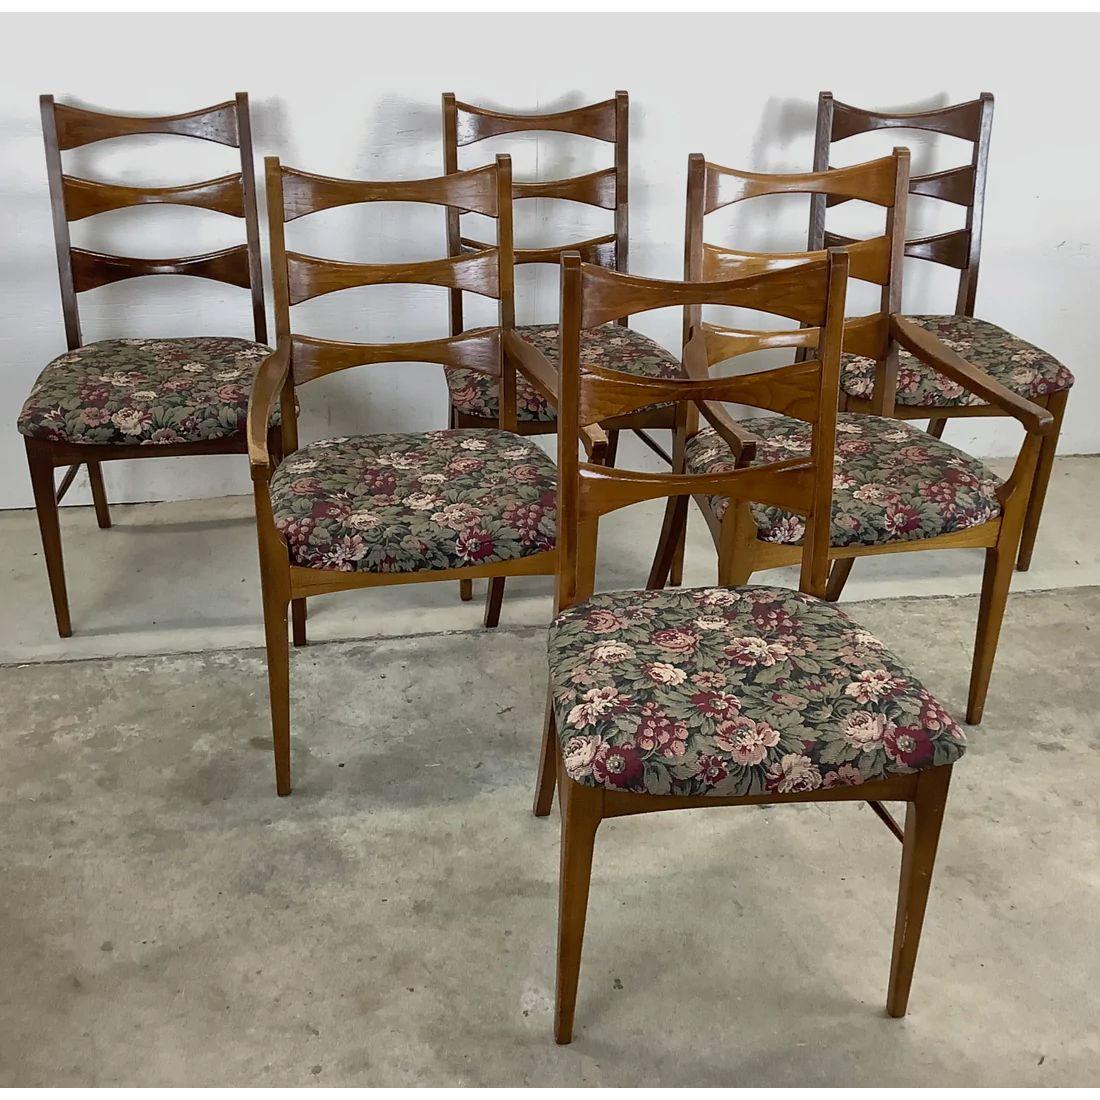 This stylish set of 6 Mid-Century Modern dining chairs from the Lane 